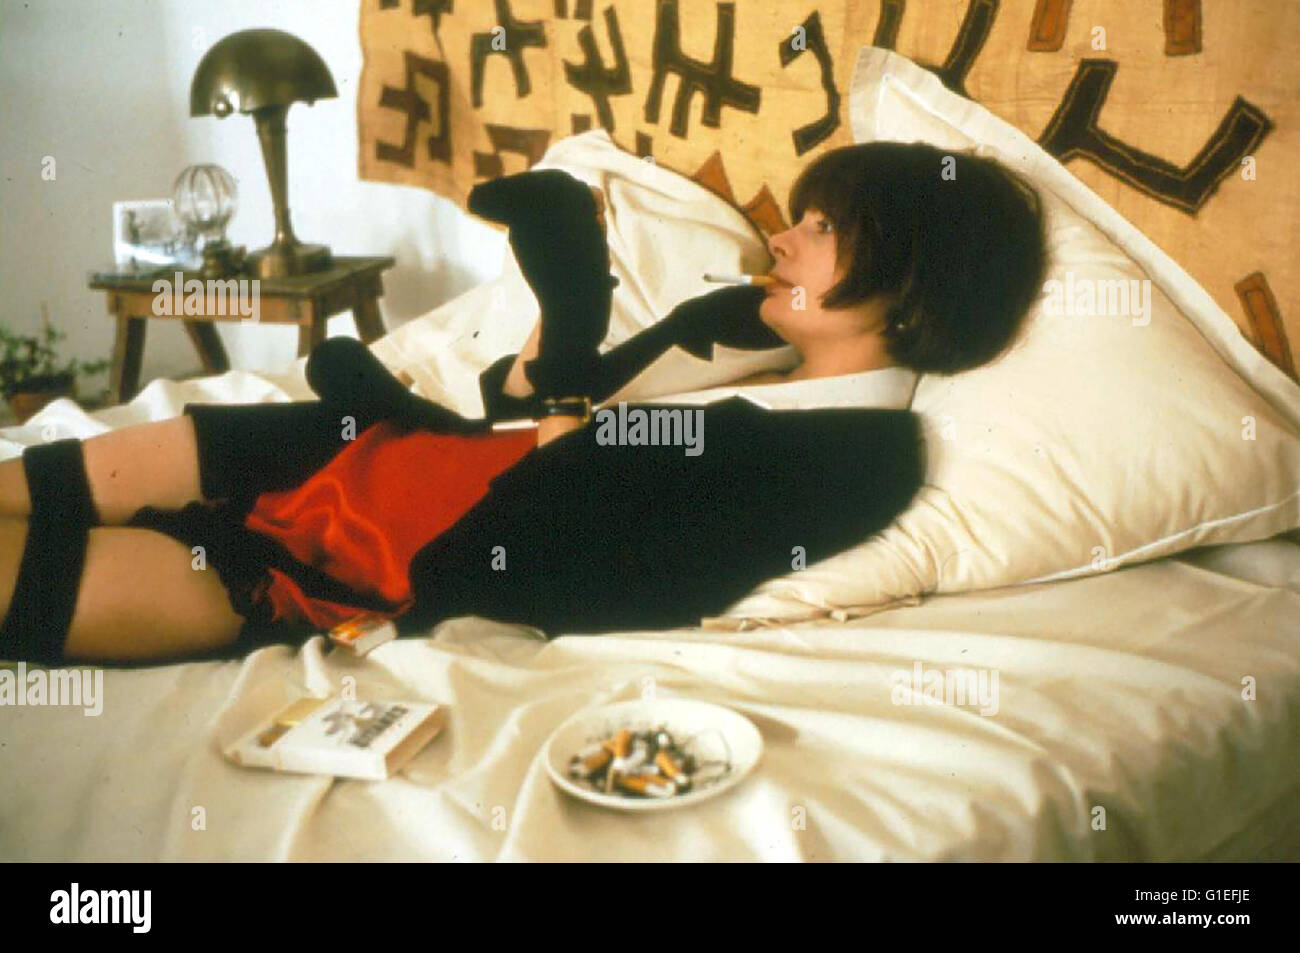 Marie Trintignant High Resolution Stock Photography and Images - Alamy